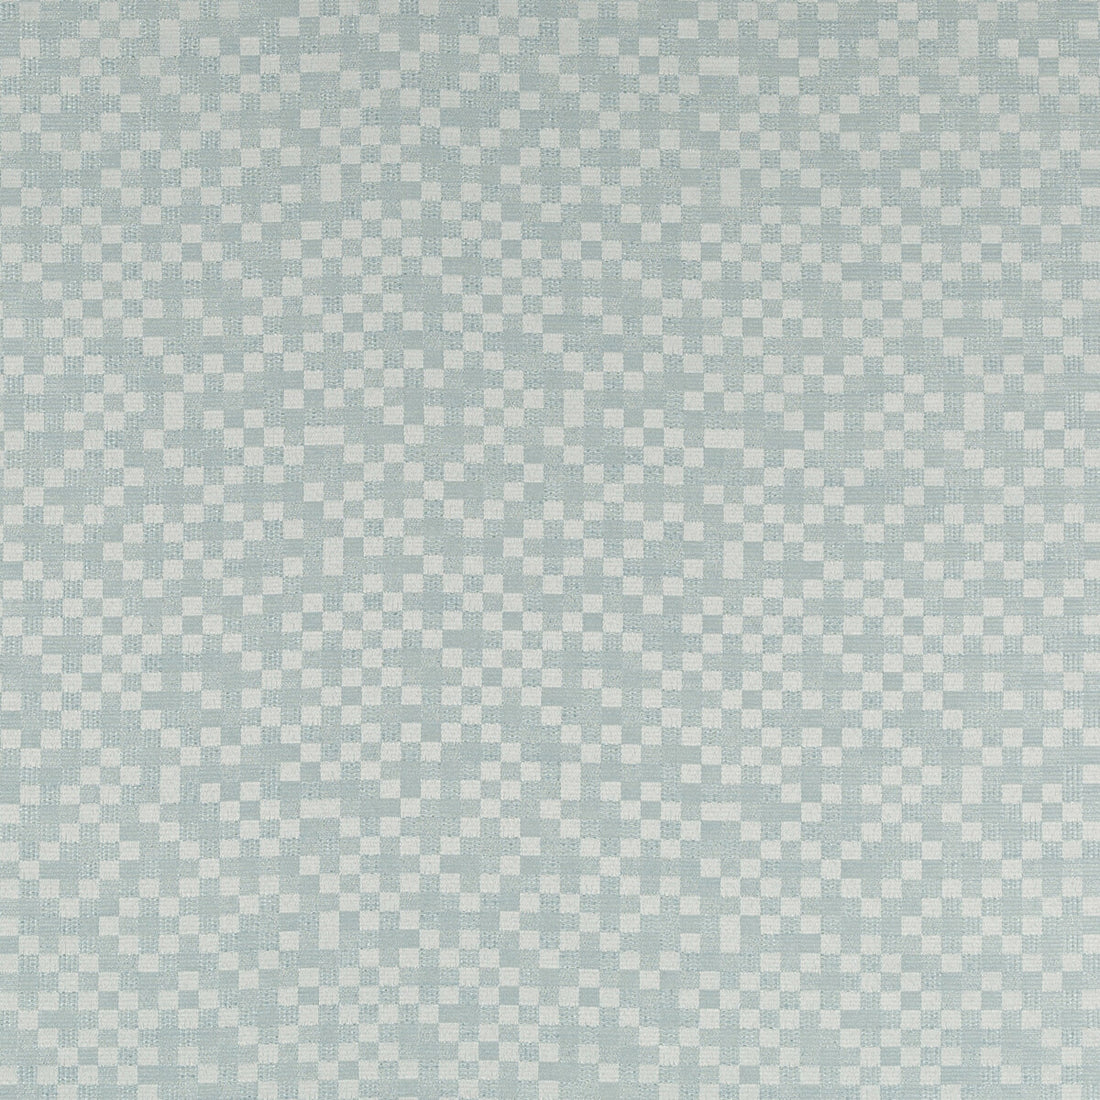 Levi fabric in sea green color - pattern 4658.135.0 - by Kravet Contract